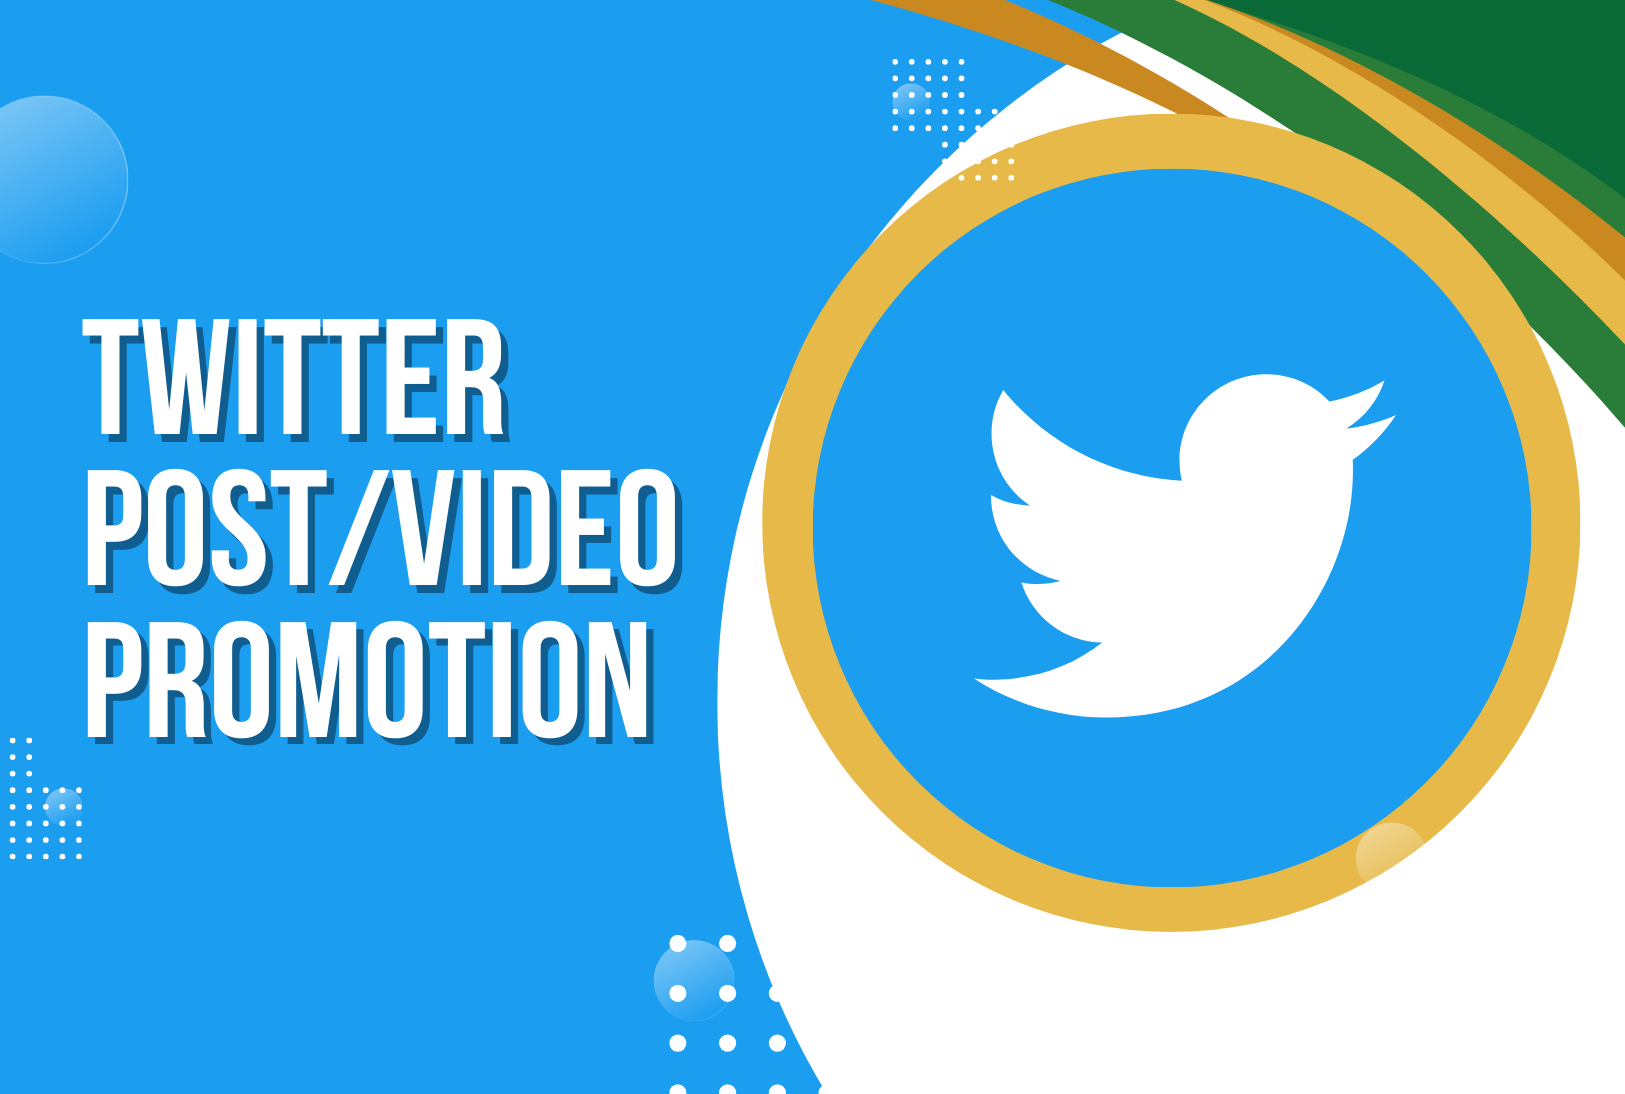 1000 High-quality views on your Twitter video, Organic Twitter post promotion and engagement